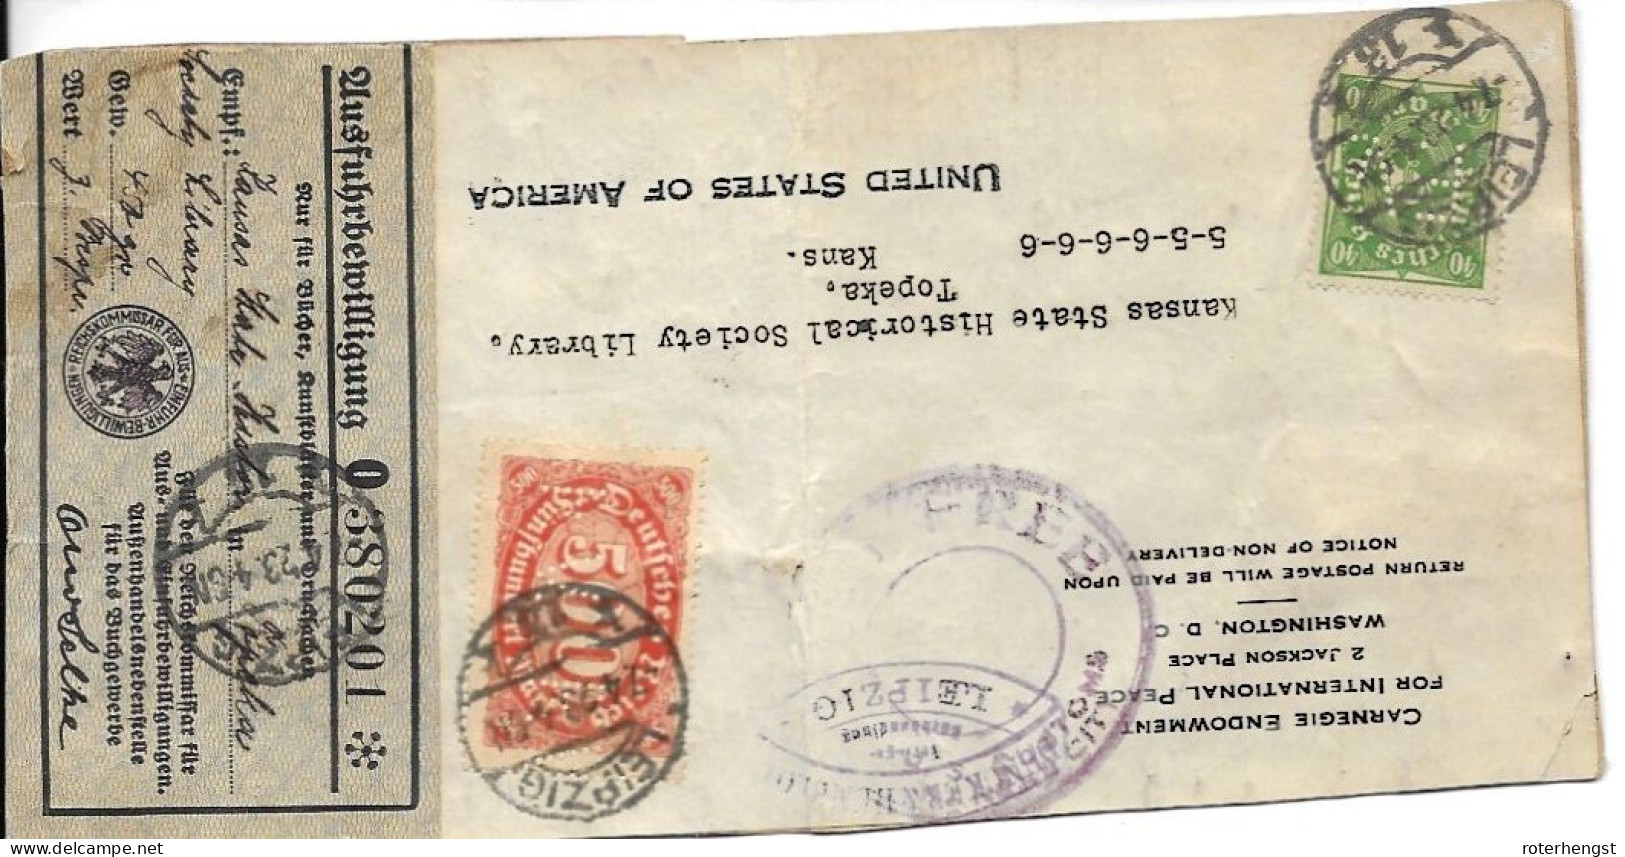 Germany Infla Folded Card With Export License From Leipzig To USA FV Perfins 7.4.1923 - Covers & Documents